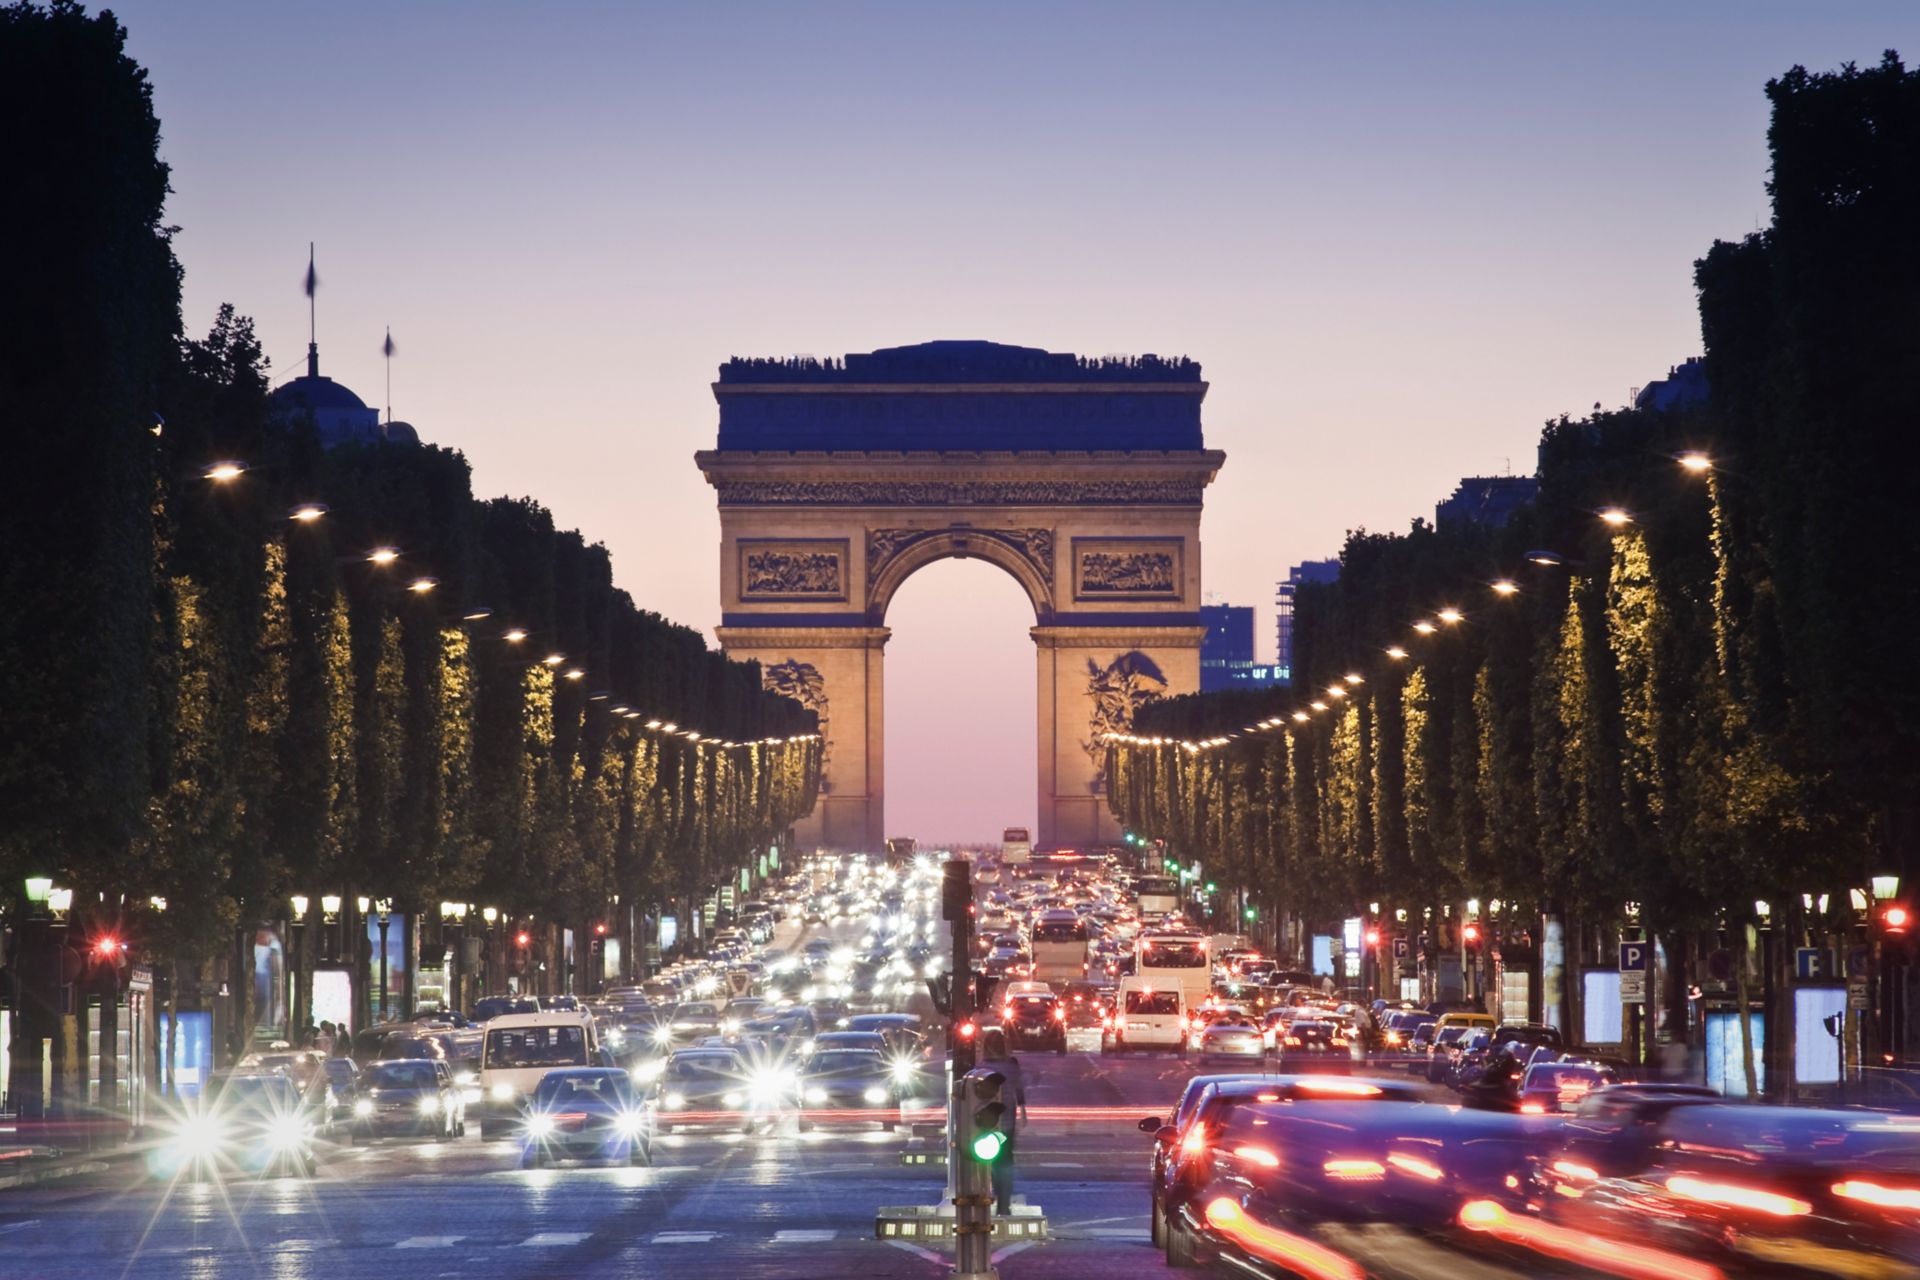 Pretty night time illuminations of the Impressive Arc de Triomphe (1833) along the famous tree lined Avenue des Champs-Elysees in Paris. ProPhoto profile for precise color reproduction.